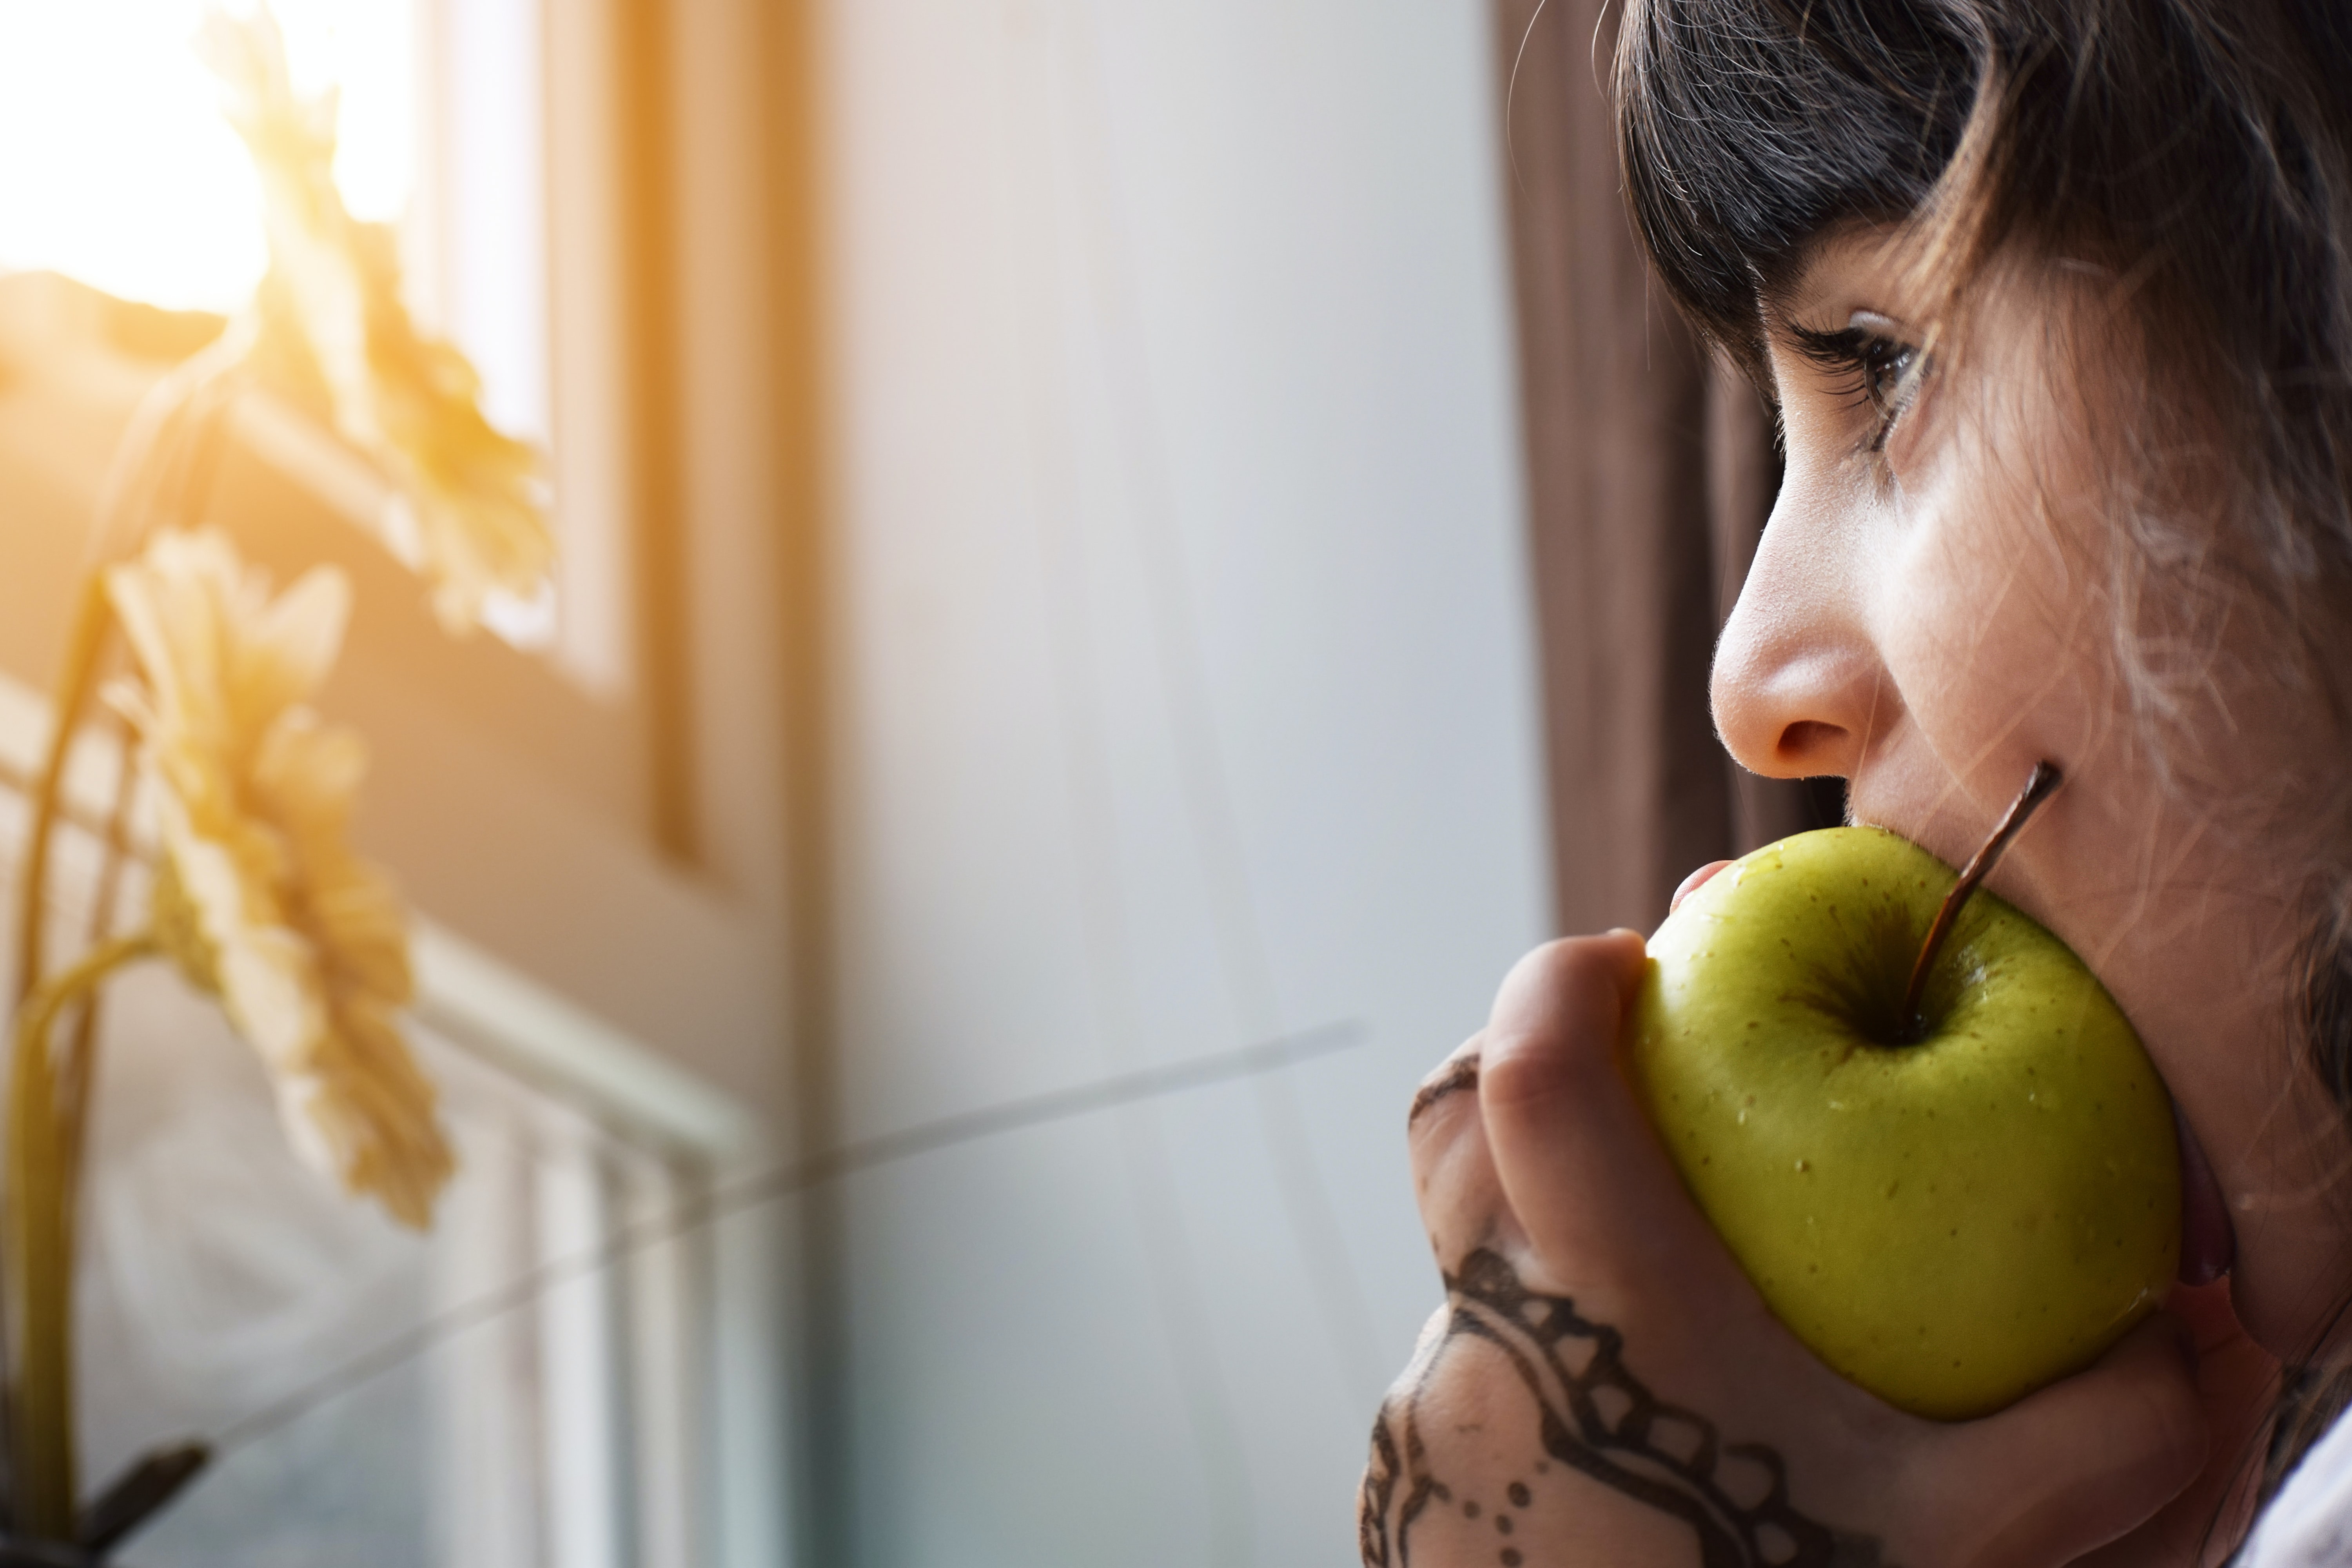 Little girl eating an apple looking out the window